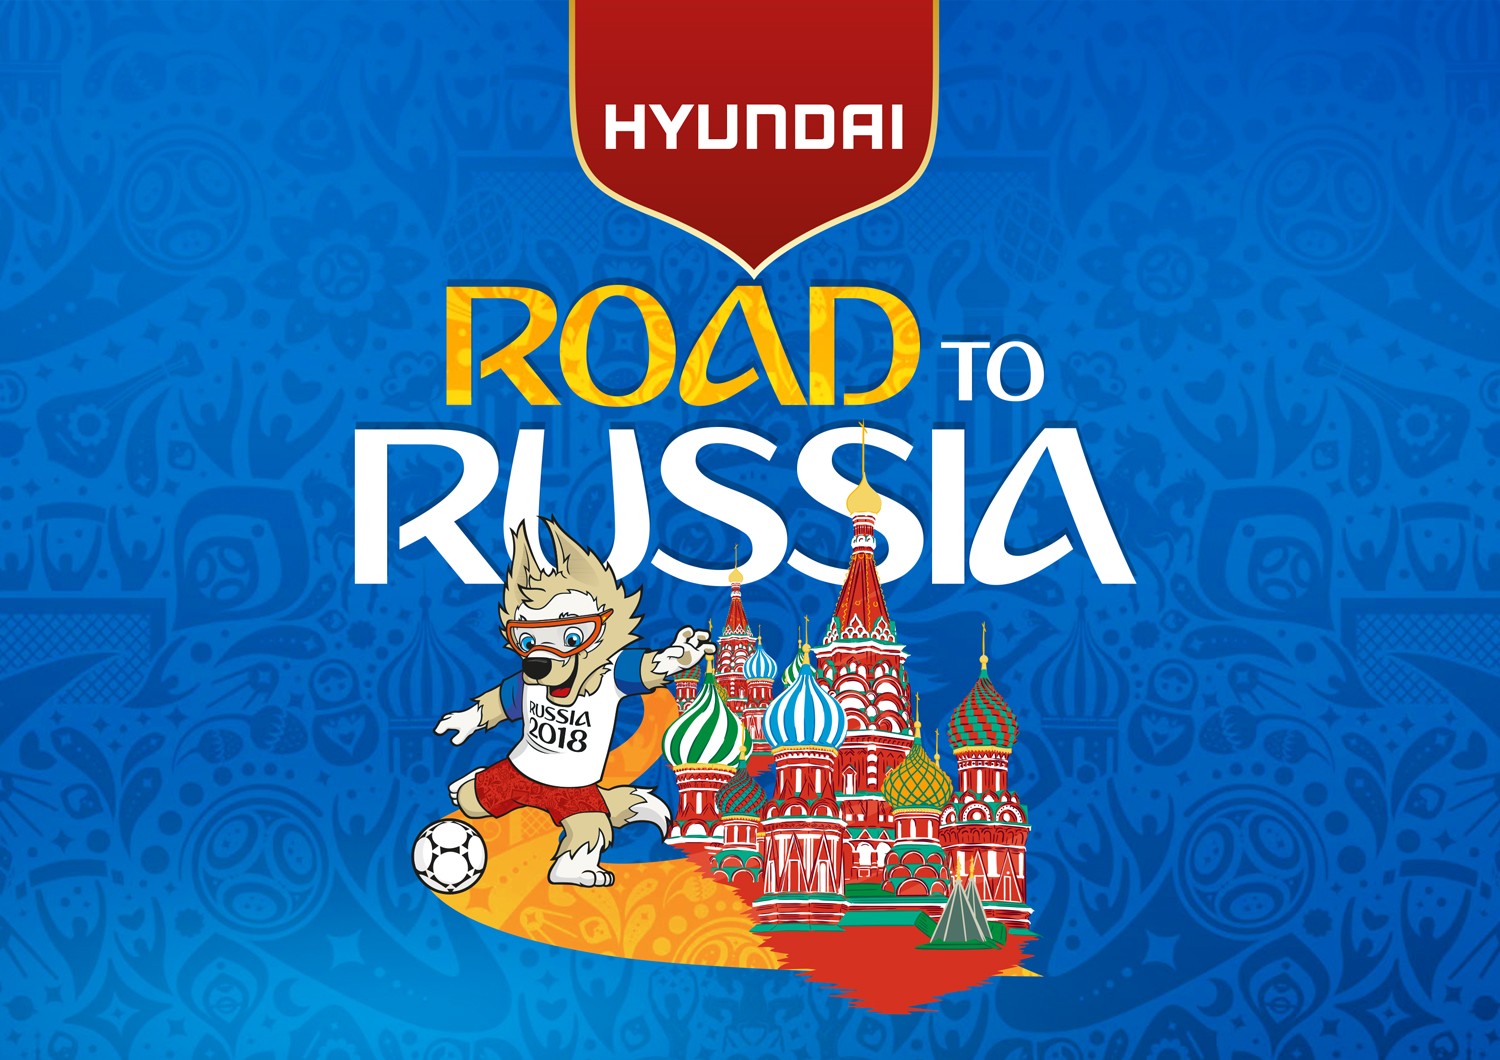 Hyundai is sending four “Road to Russia” winners to Russia